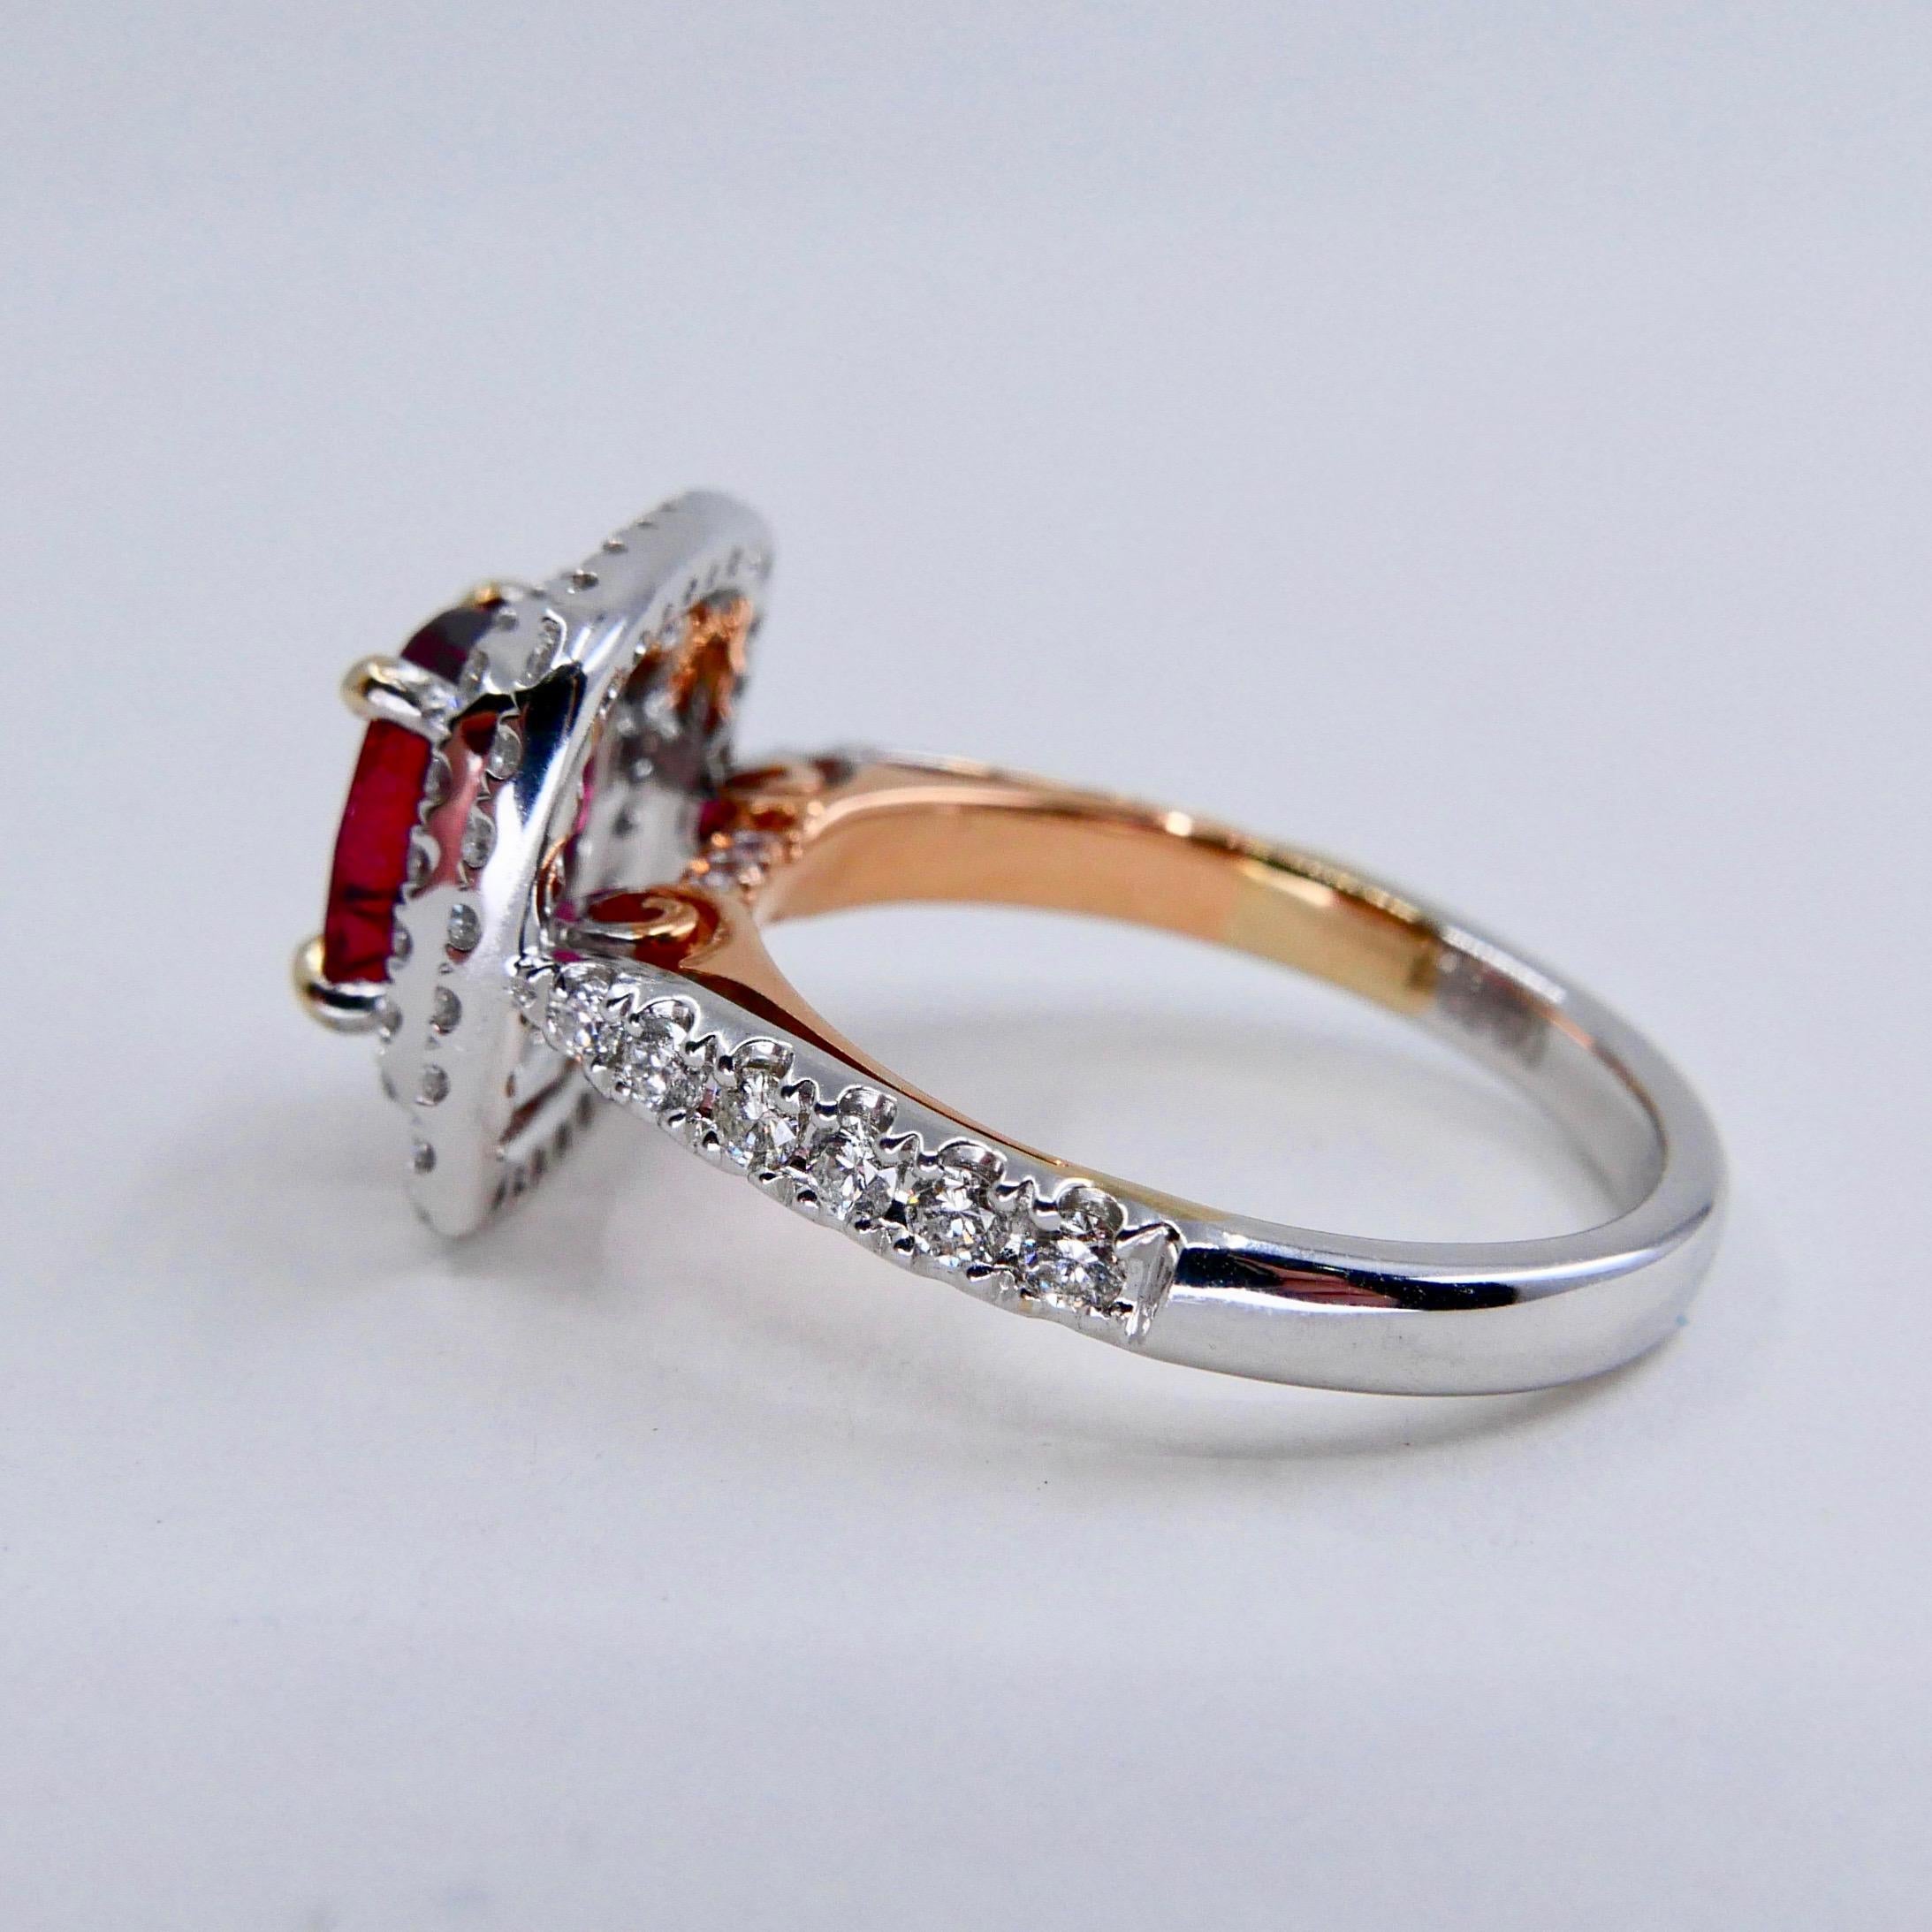 Natural Red Spinel 1.51 Carat and Diamond Ring 18K Two-Tone White and Rose Gold 4